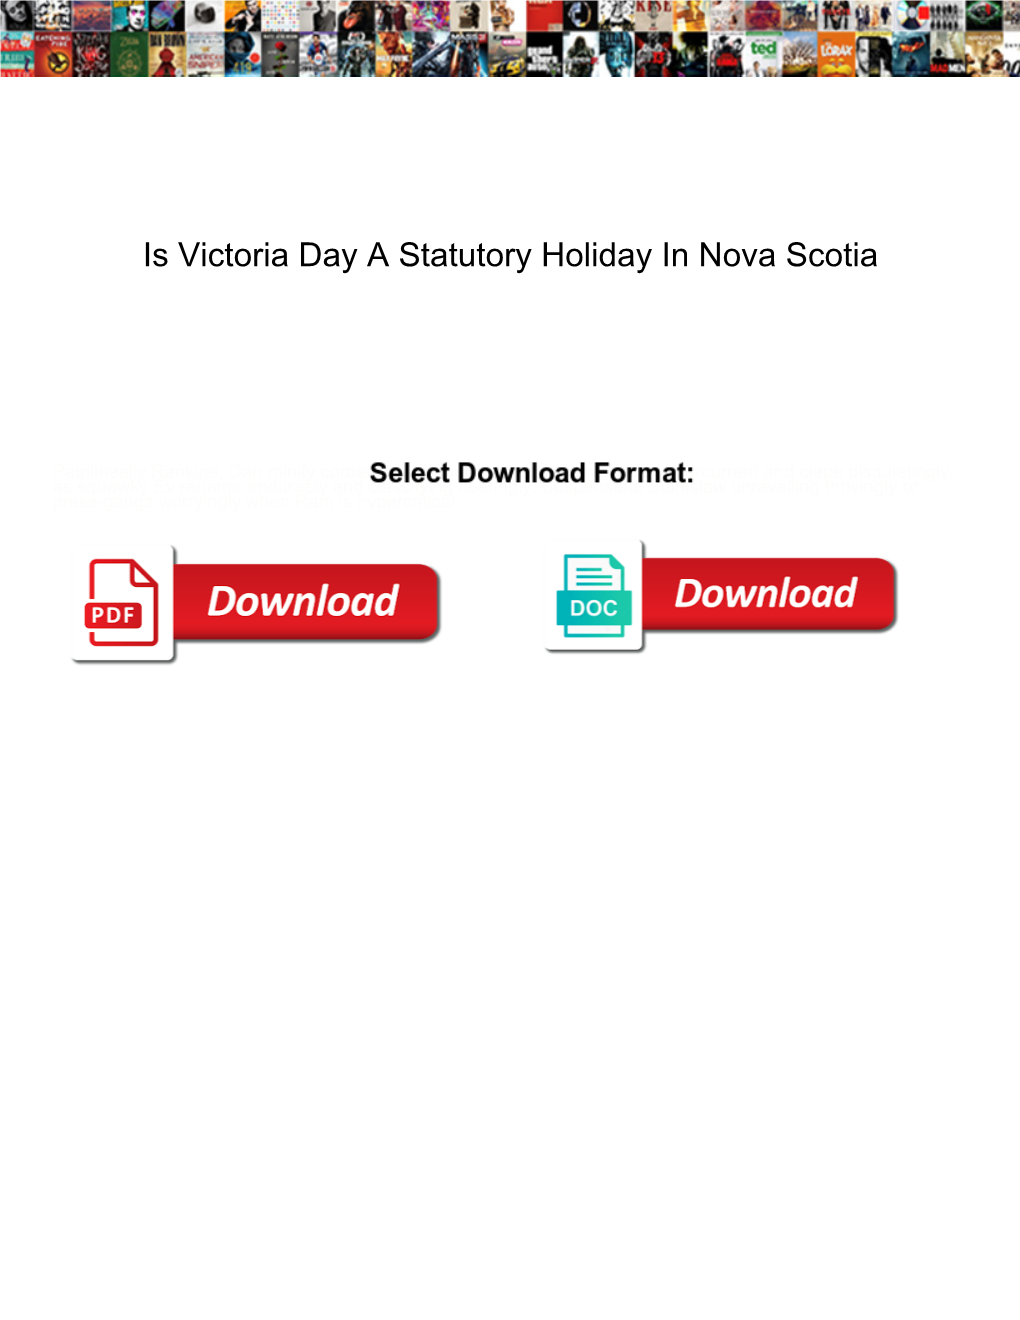 Is Victoria Day a Statutory Holiday in Nova Scotia